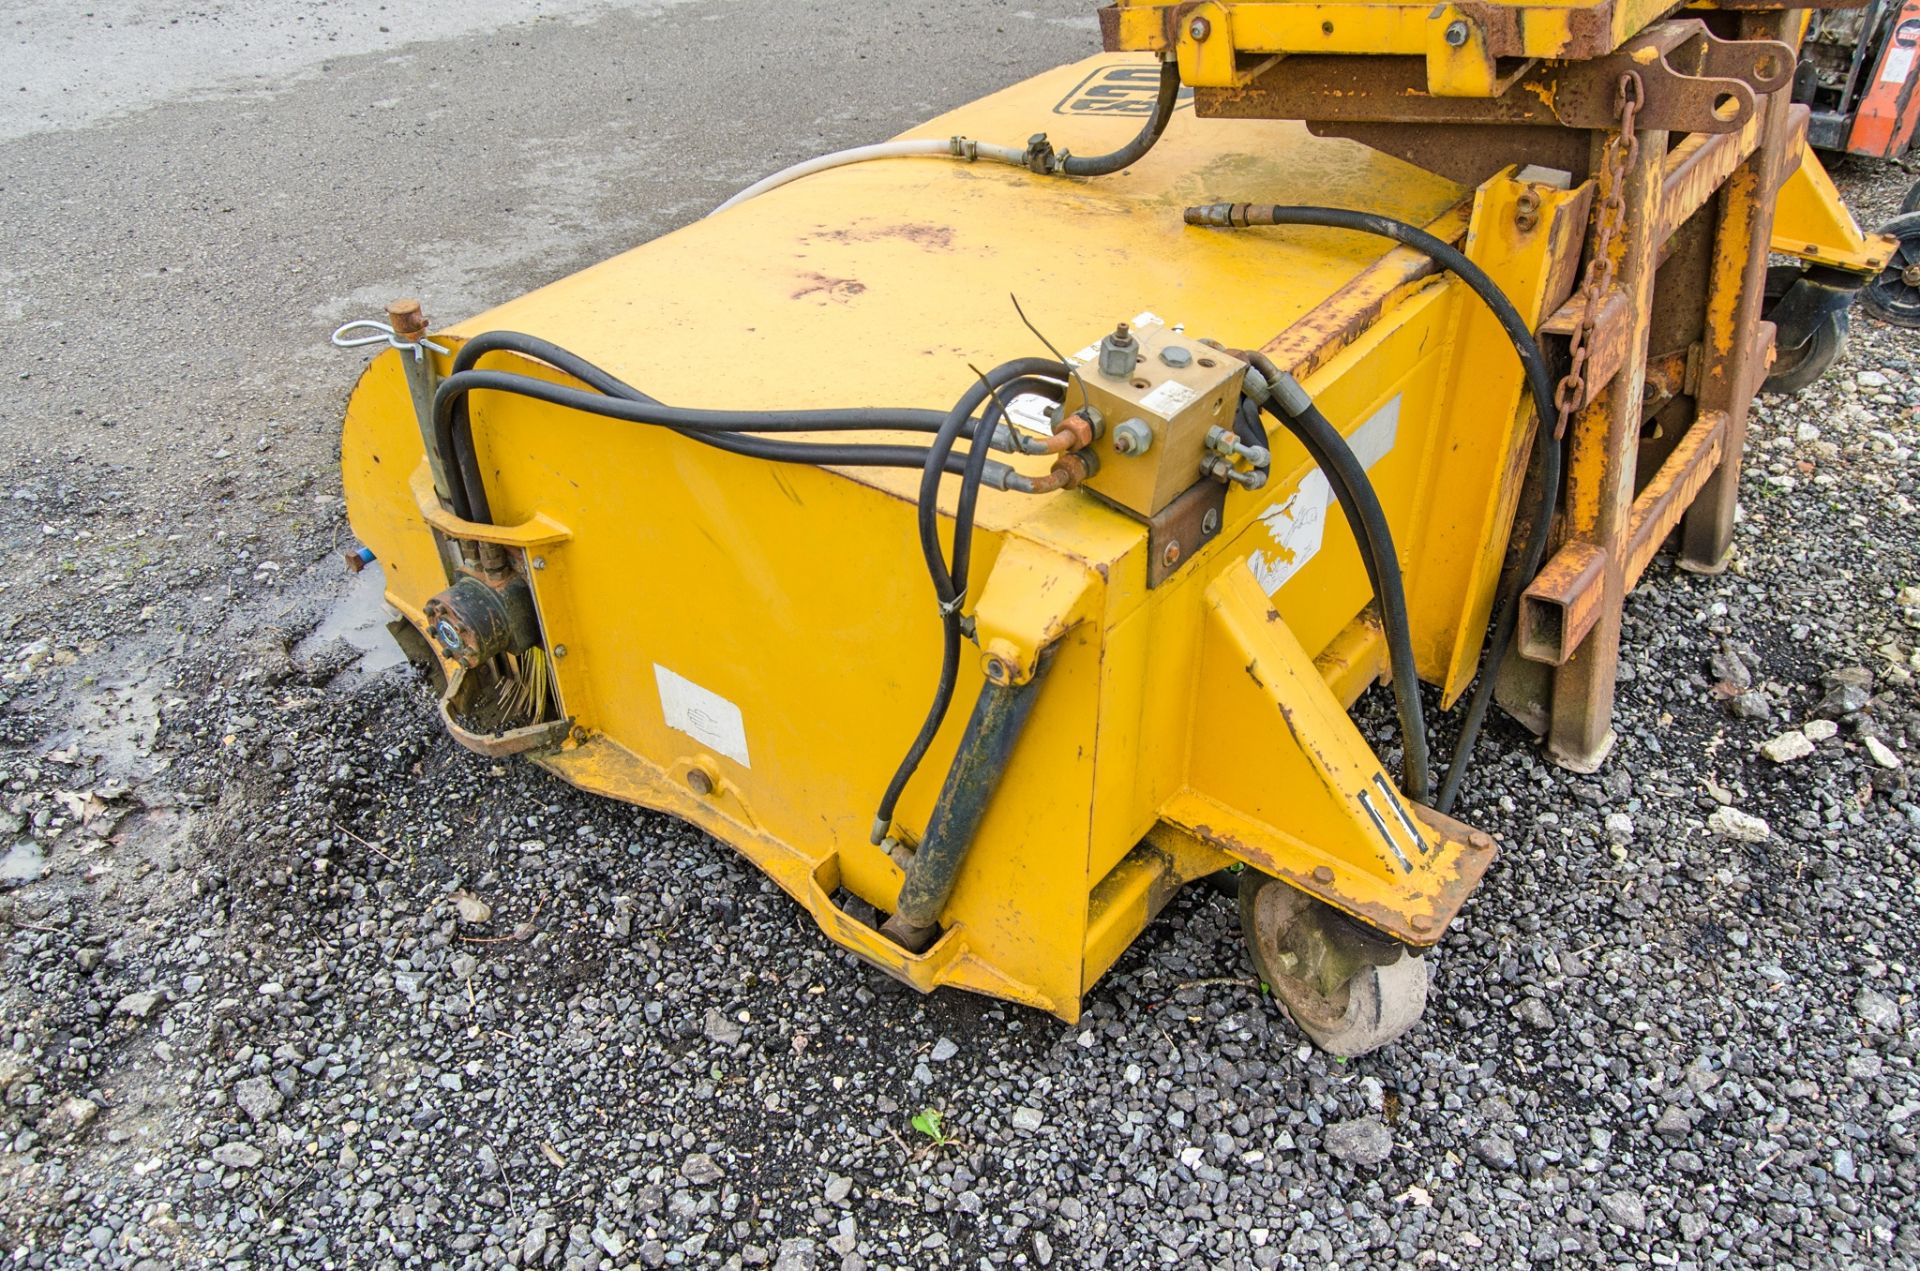 JCB 500 hydraulic sweeper attachment Year: 2005 RPLP3307 ** No VAT on hammer but VAT will be charged - Image 3 of 4